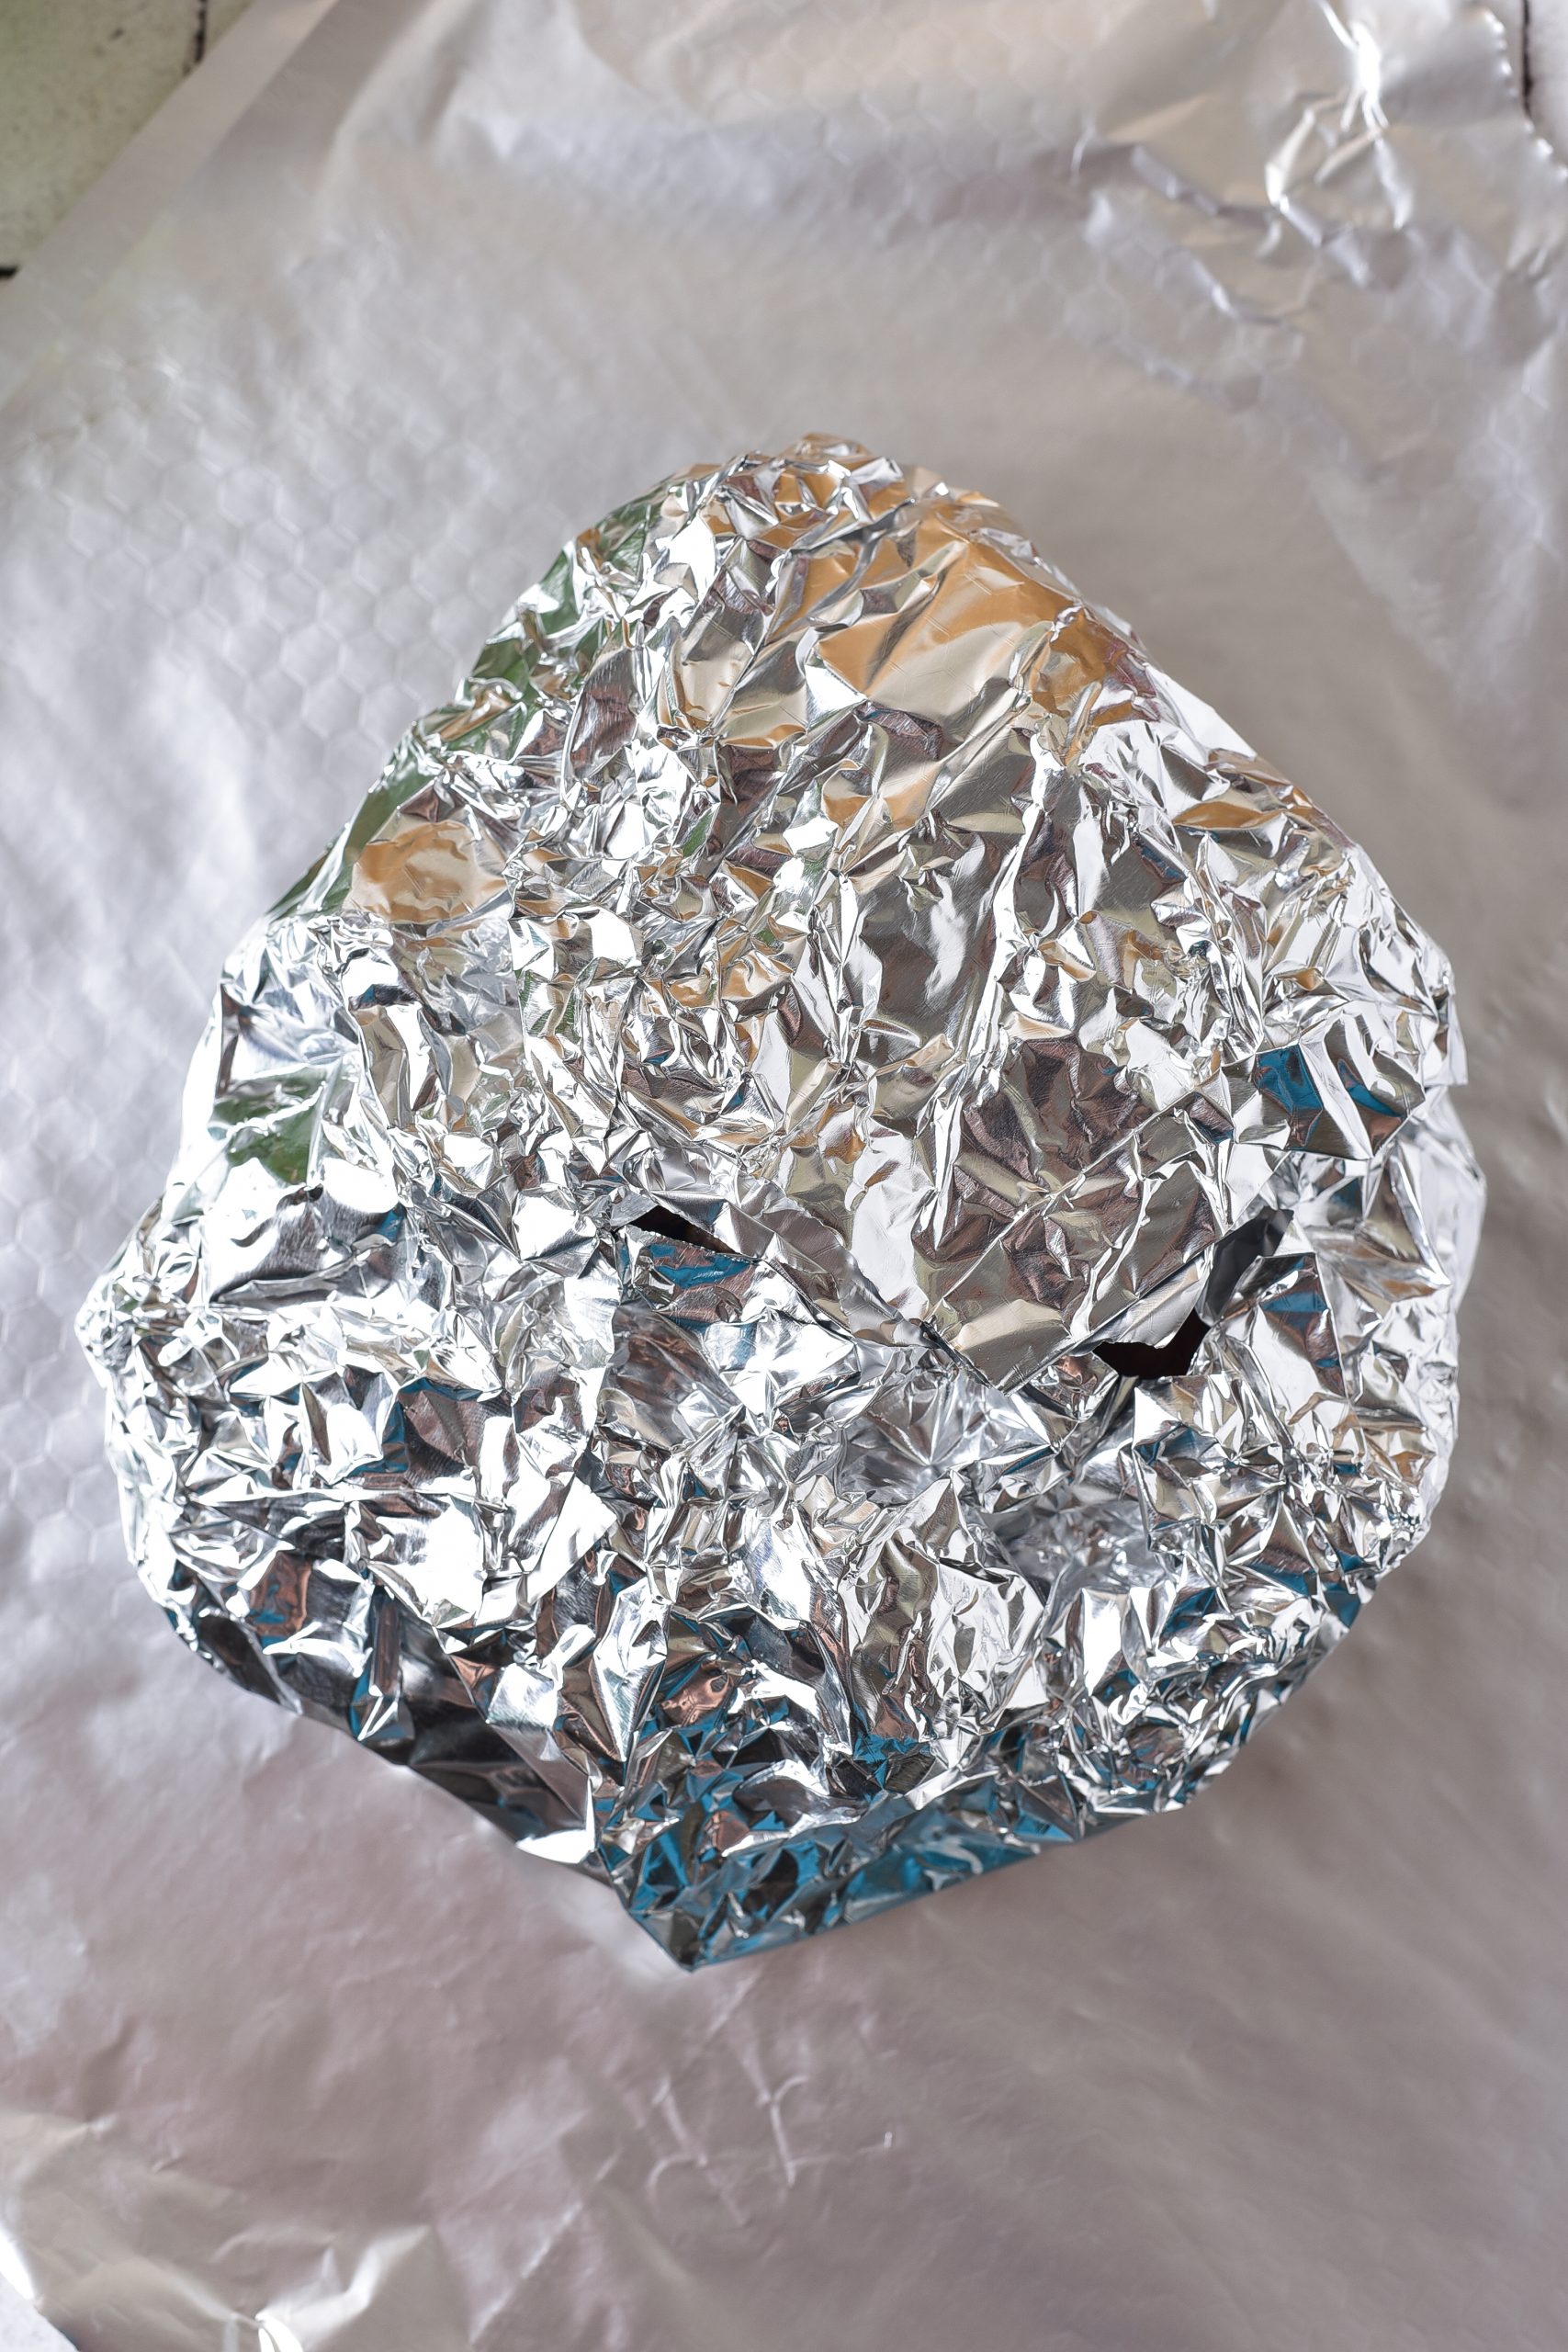 Fold the edges of the foil squares up to form a closed packet. 